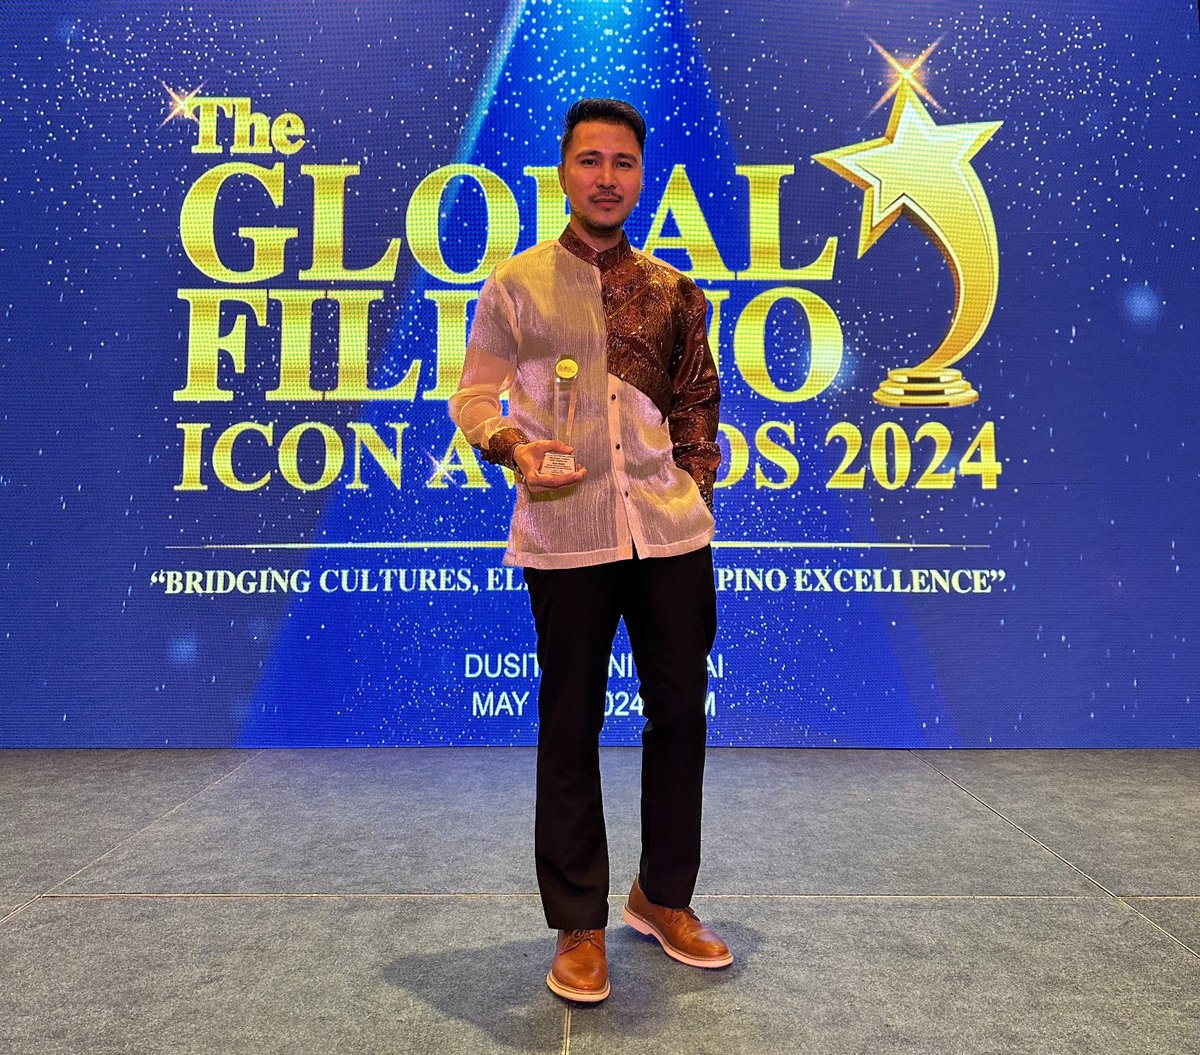 Here is a brief extract from the 4th Global Filipino Icon Awards organized by The Global Filipino Magazine. Thank you for the Excellence in Interior Design & Event Production award. Congratulations and thank you to everyone behind the prestigious event. #dxb #dubai #uae